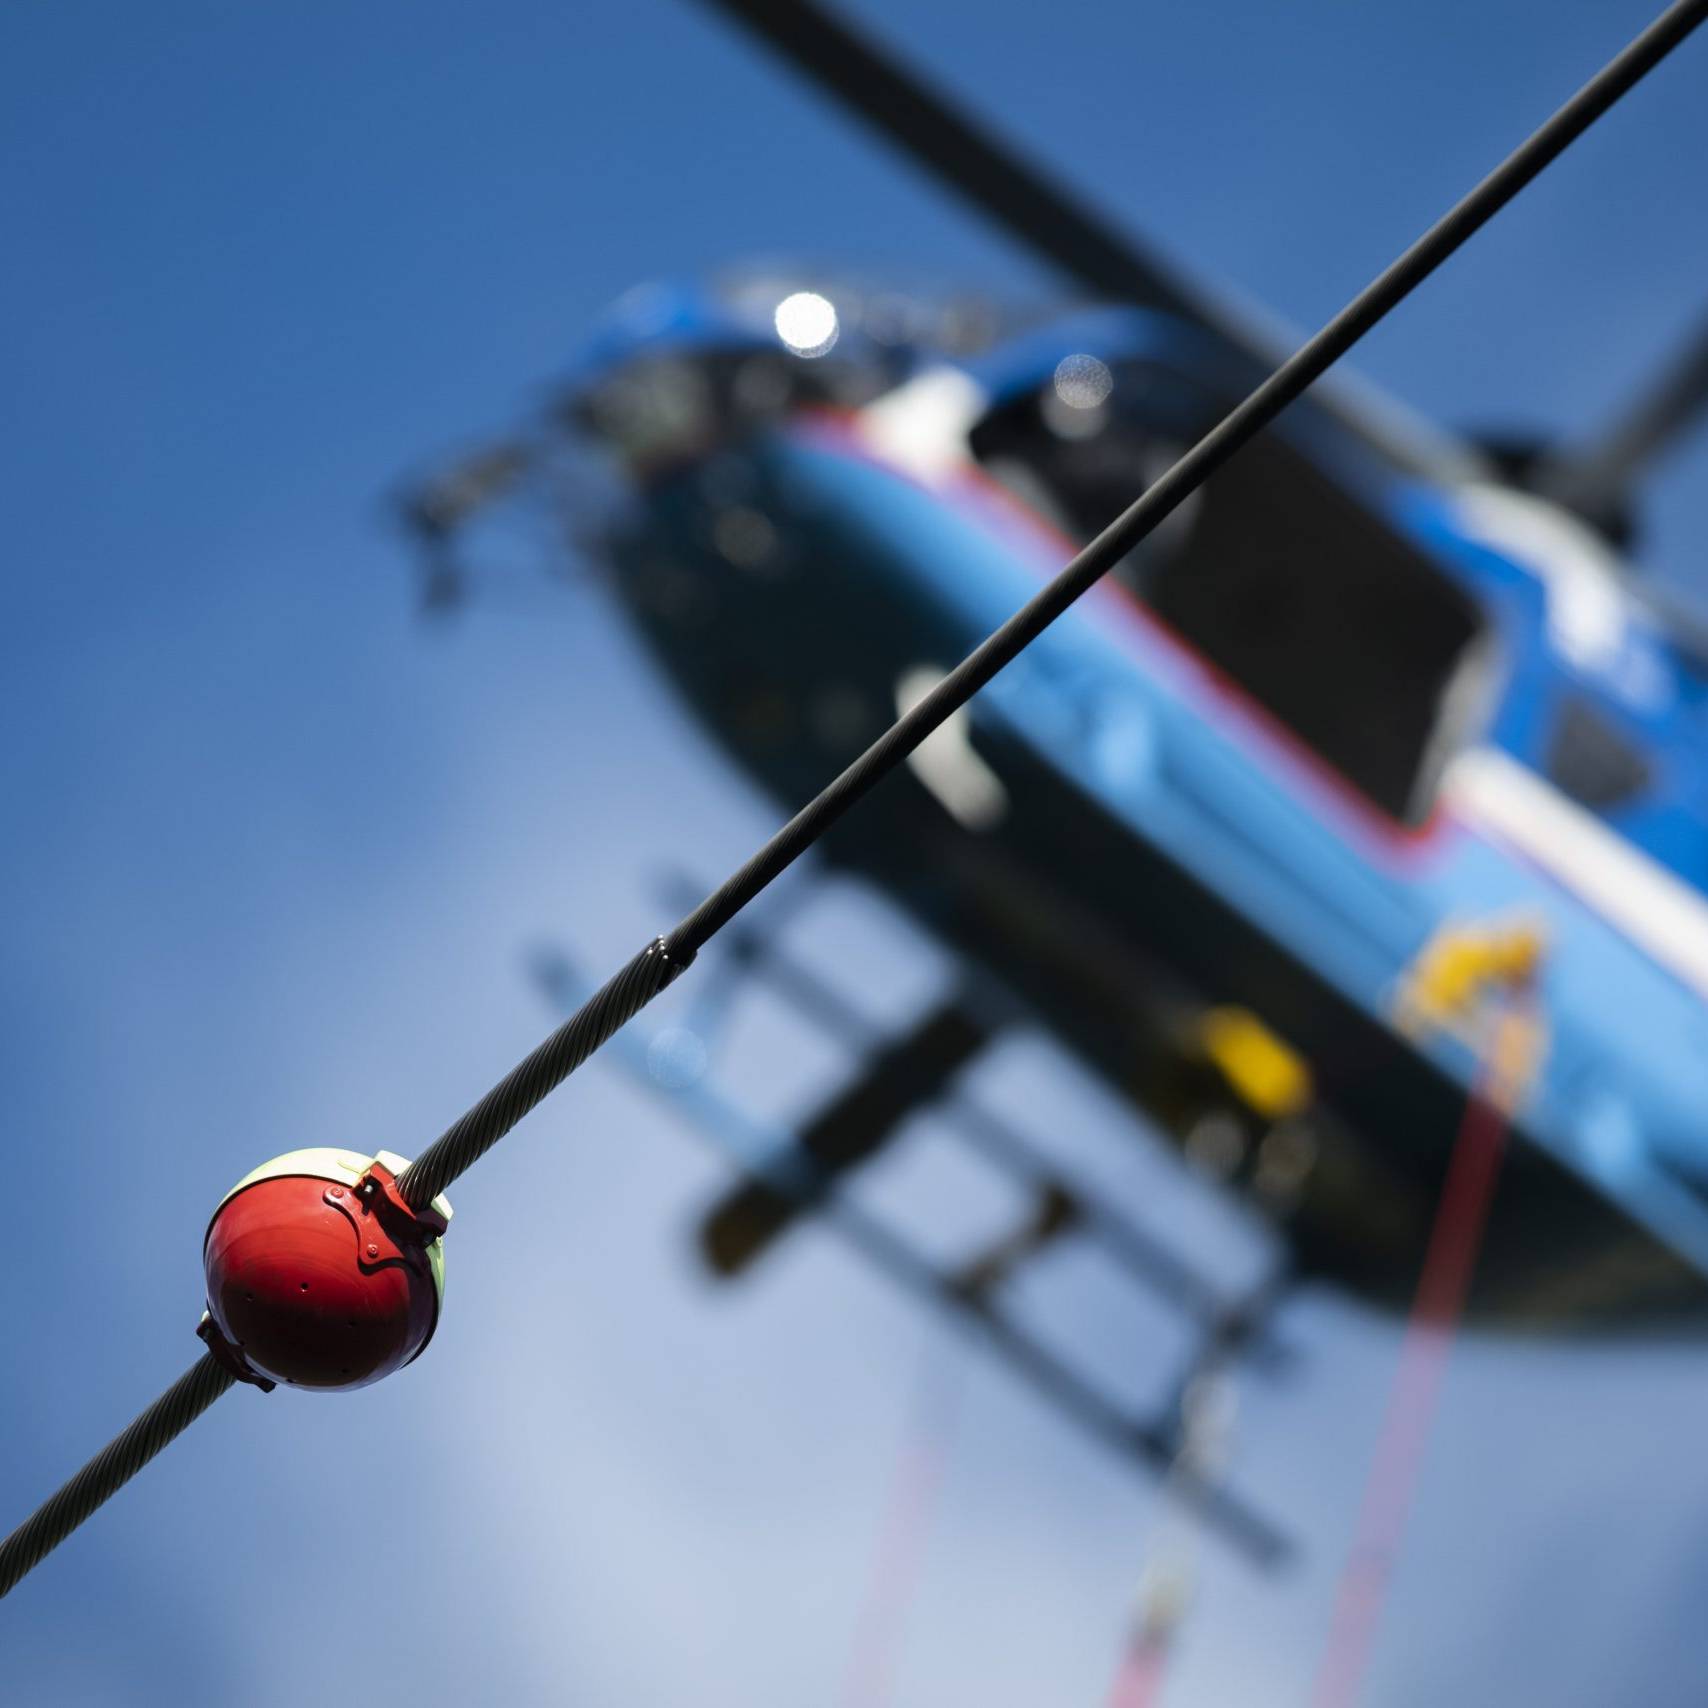 an image of a helicopter with human external cargo baskets